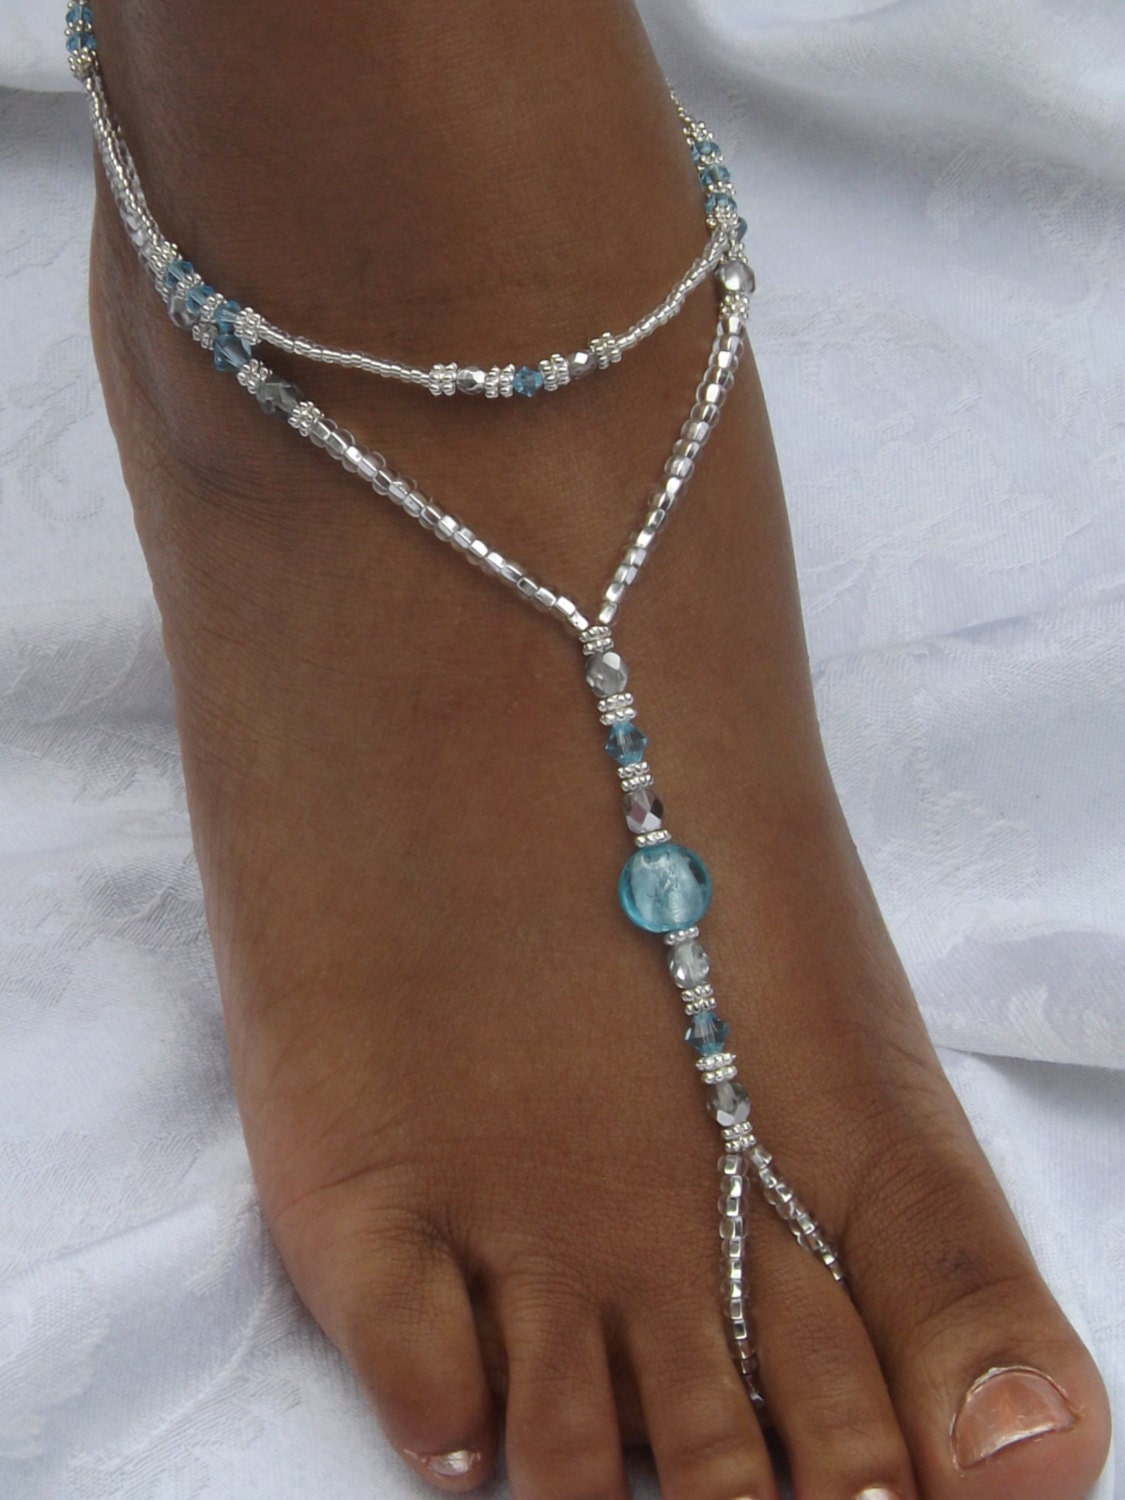 Blue Wedding Foot Jewelry Silver Beach by SubtleExpressions